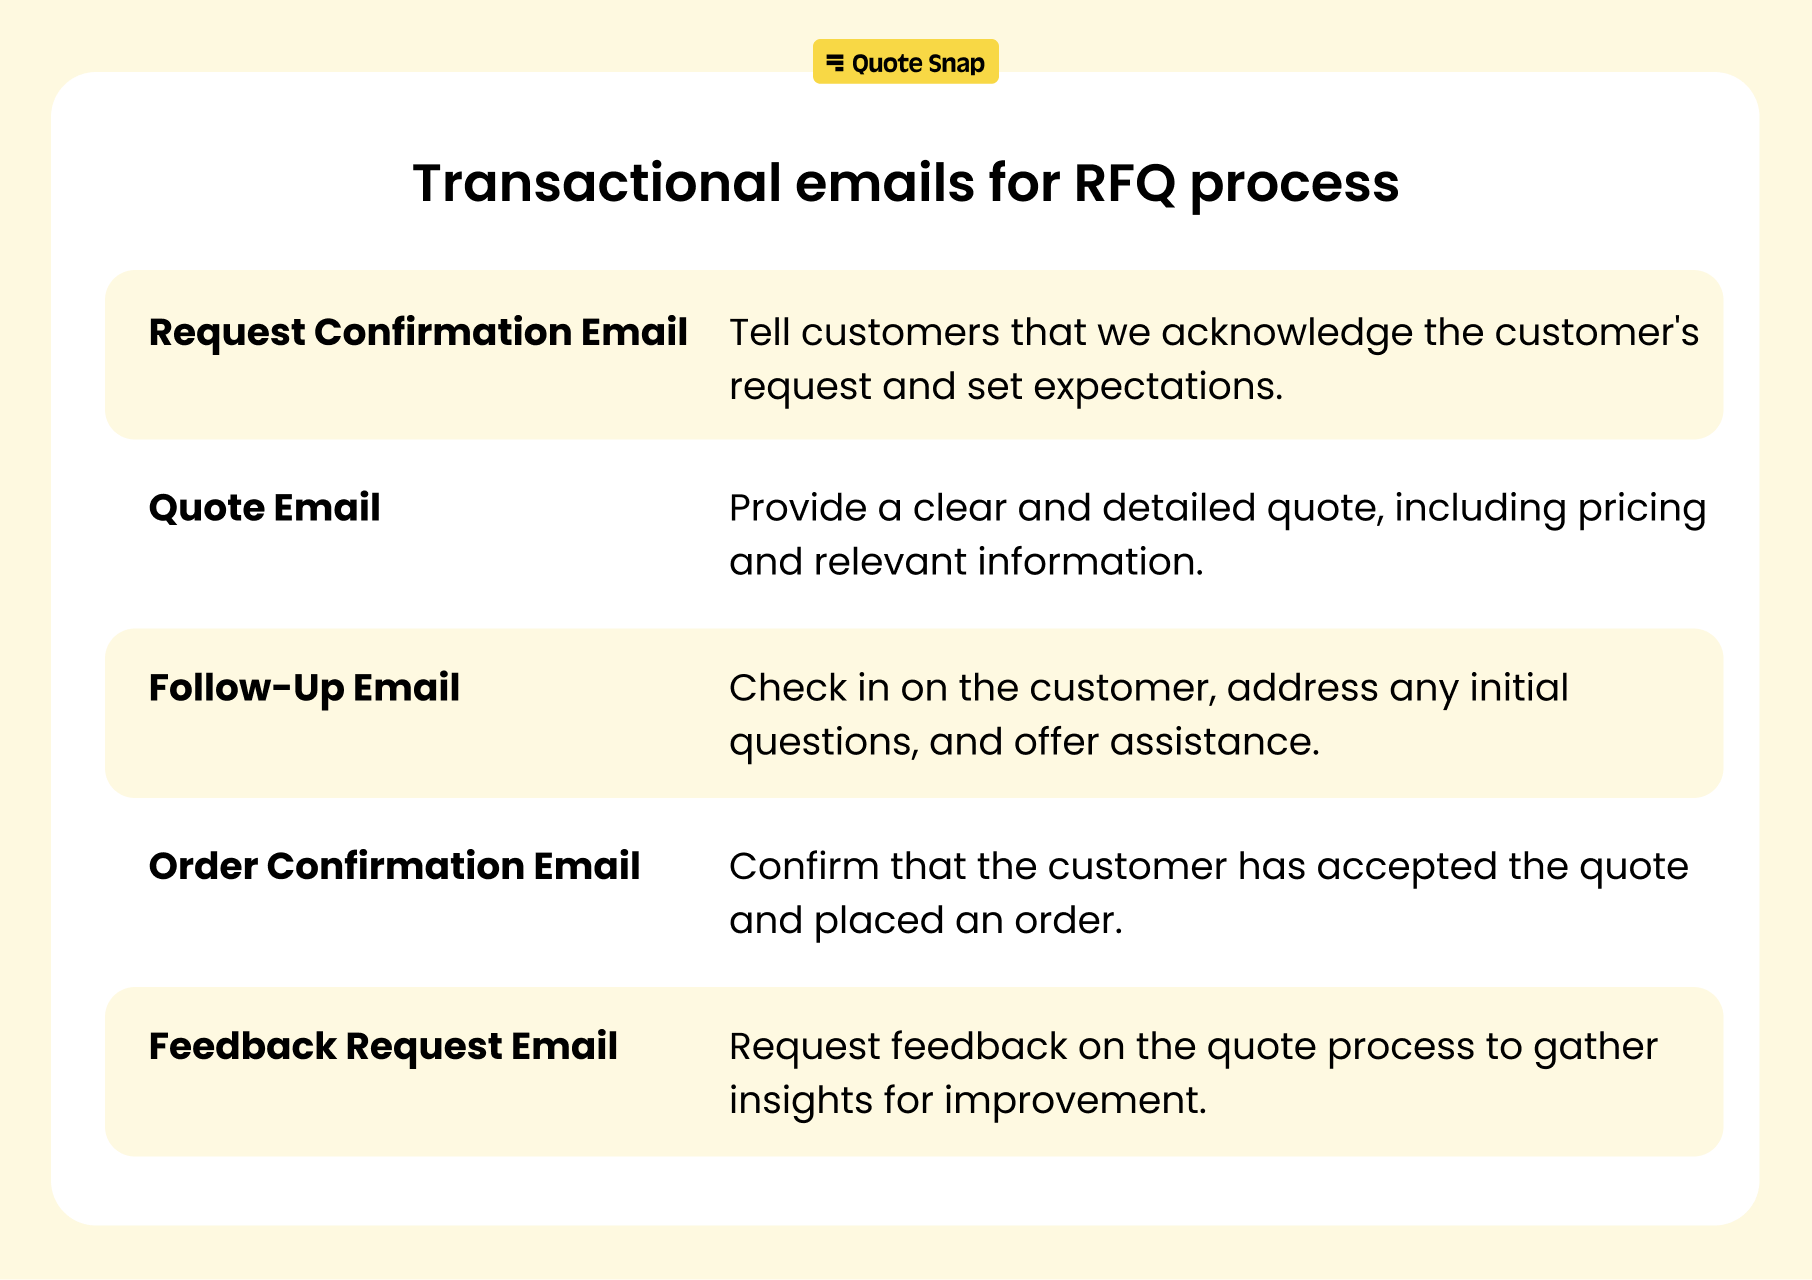 Types of transactional emails for RFQ Process